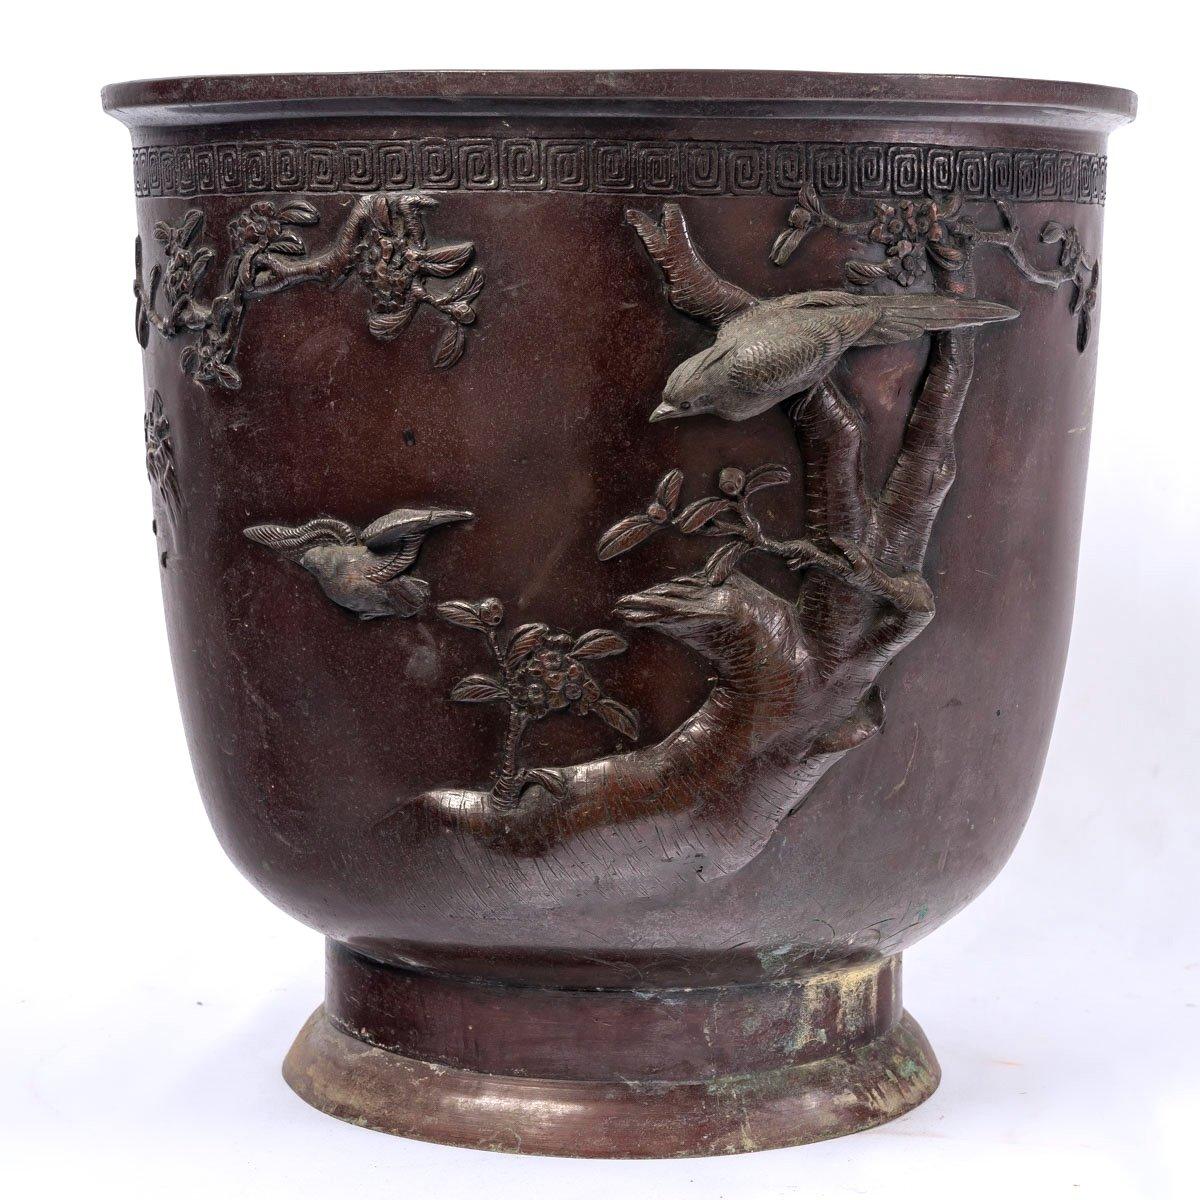  It is a huge bronze pot holder with a double patina. 
Chiselings of Greek friezes and birds in a trendy landscape in relief. 

Period : 19th century, 
Circa : 1880 
Dimensions : Height : 34cm x diameter : 33cm

Most of the Japanese bronzes and